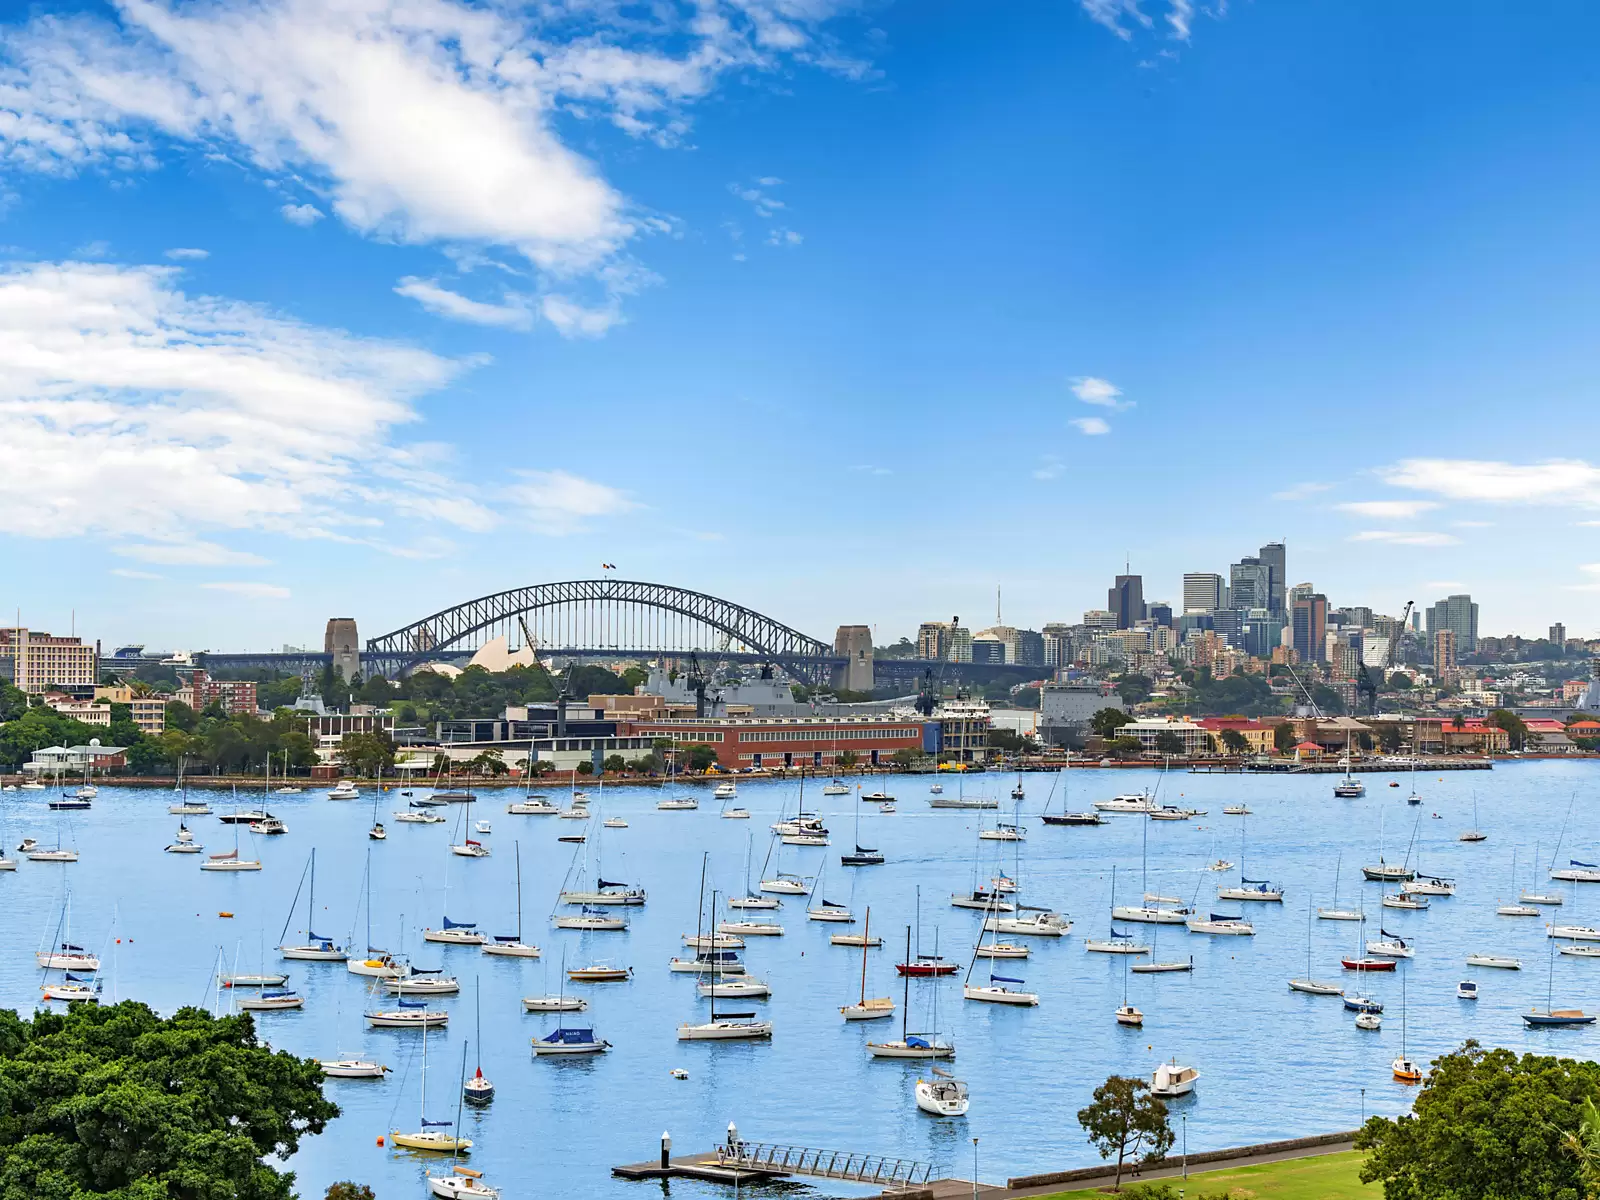 67/11 Yarranabbe Road, Darling Point For Sale by Sydney Sotheby's International Realty - image 1